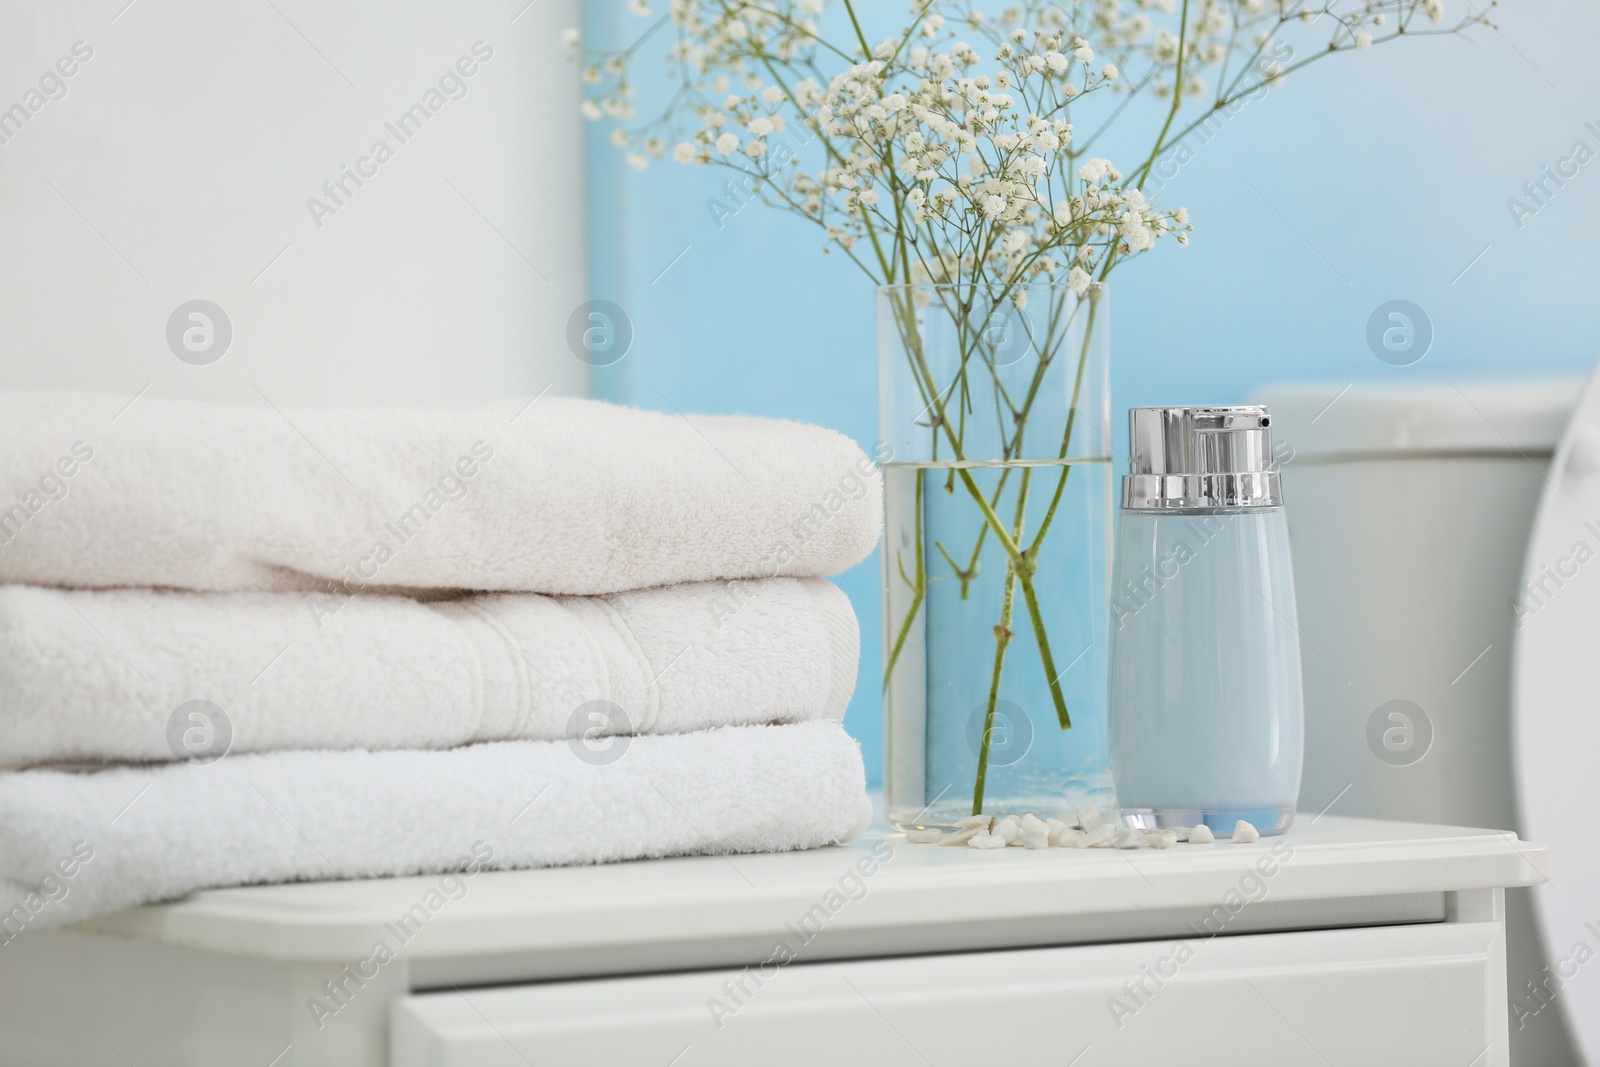 Photo of Fresh clean towels, soap dispenser and flowers on cabinet in bathroom